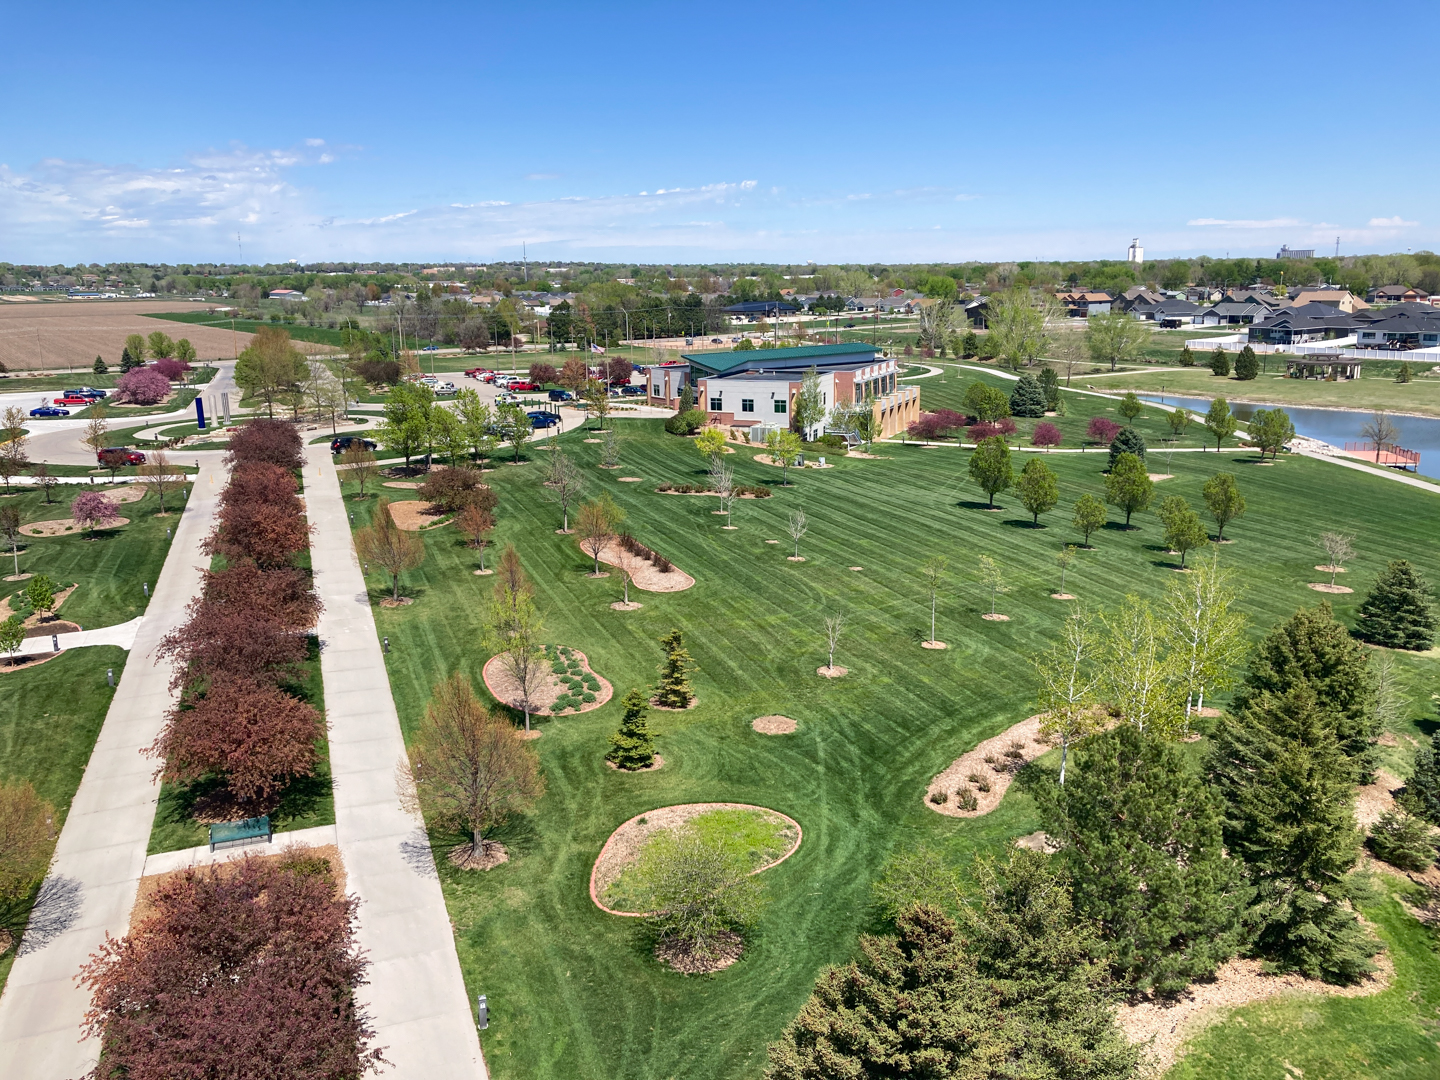 An overview of Kearney’s Yanney Heritage Park. Photo by Russell Shaffer